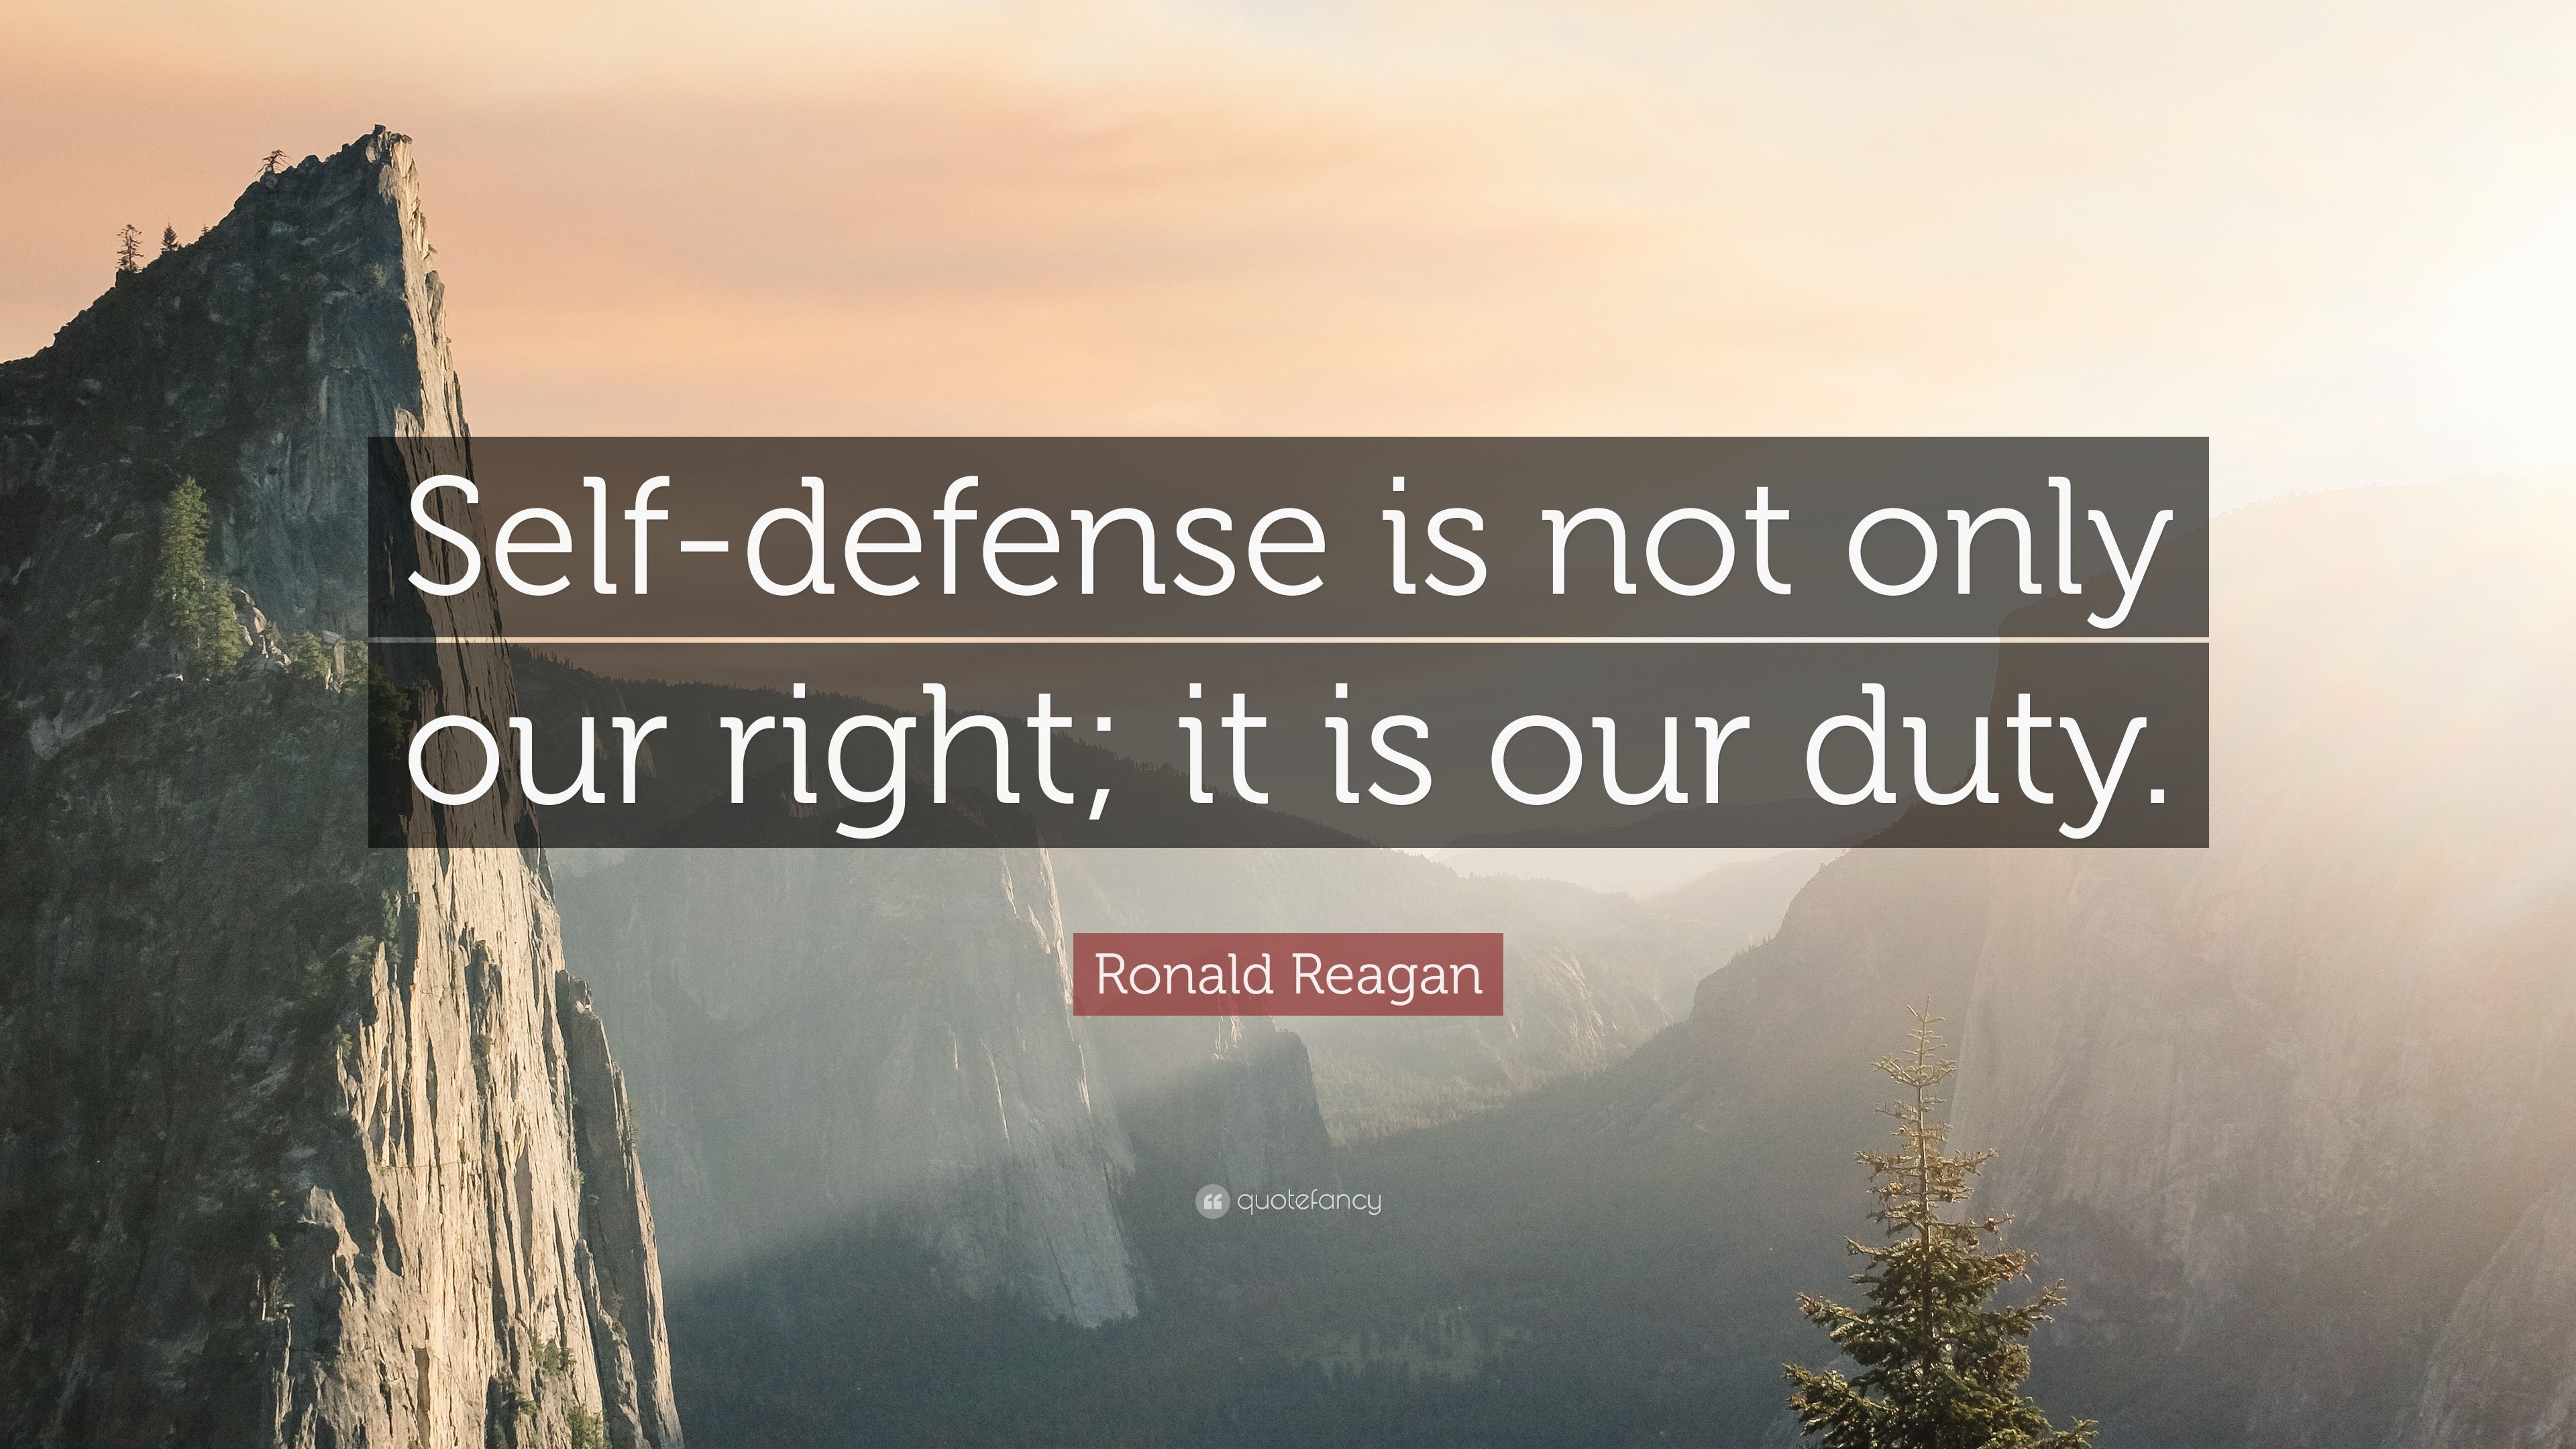 Ronald Reagan Quote: “Self Defense Is Not Only Our Right; It Is Our Duty.” (12 Wallpaper)